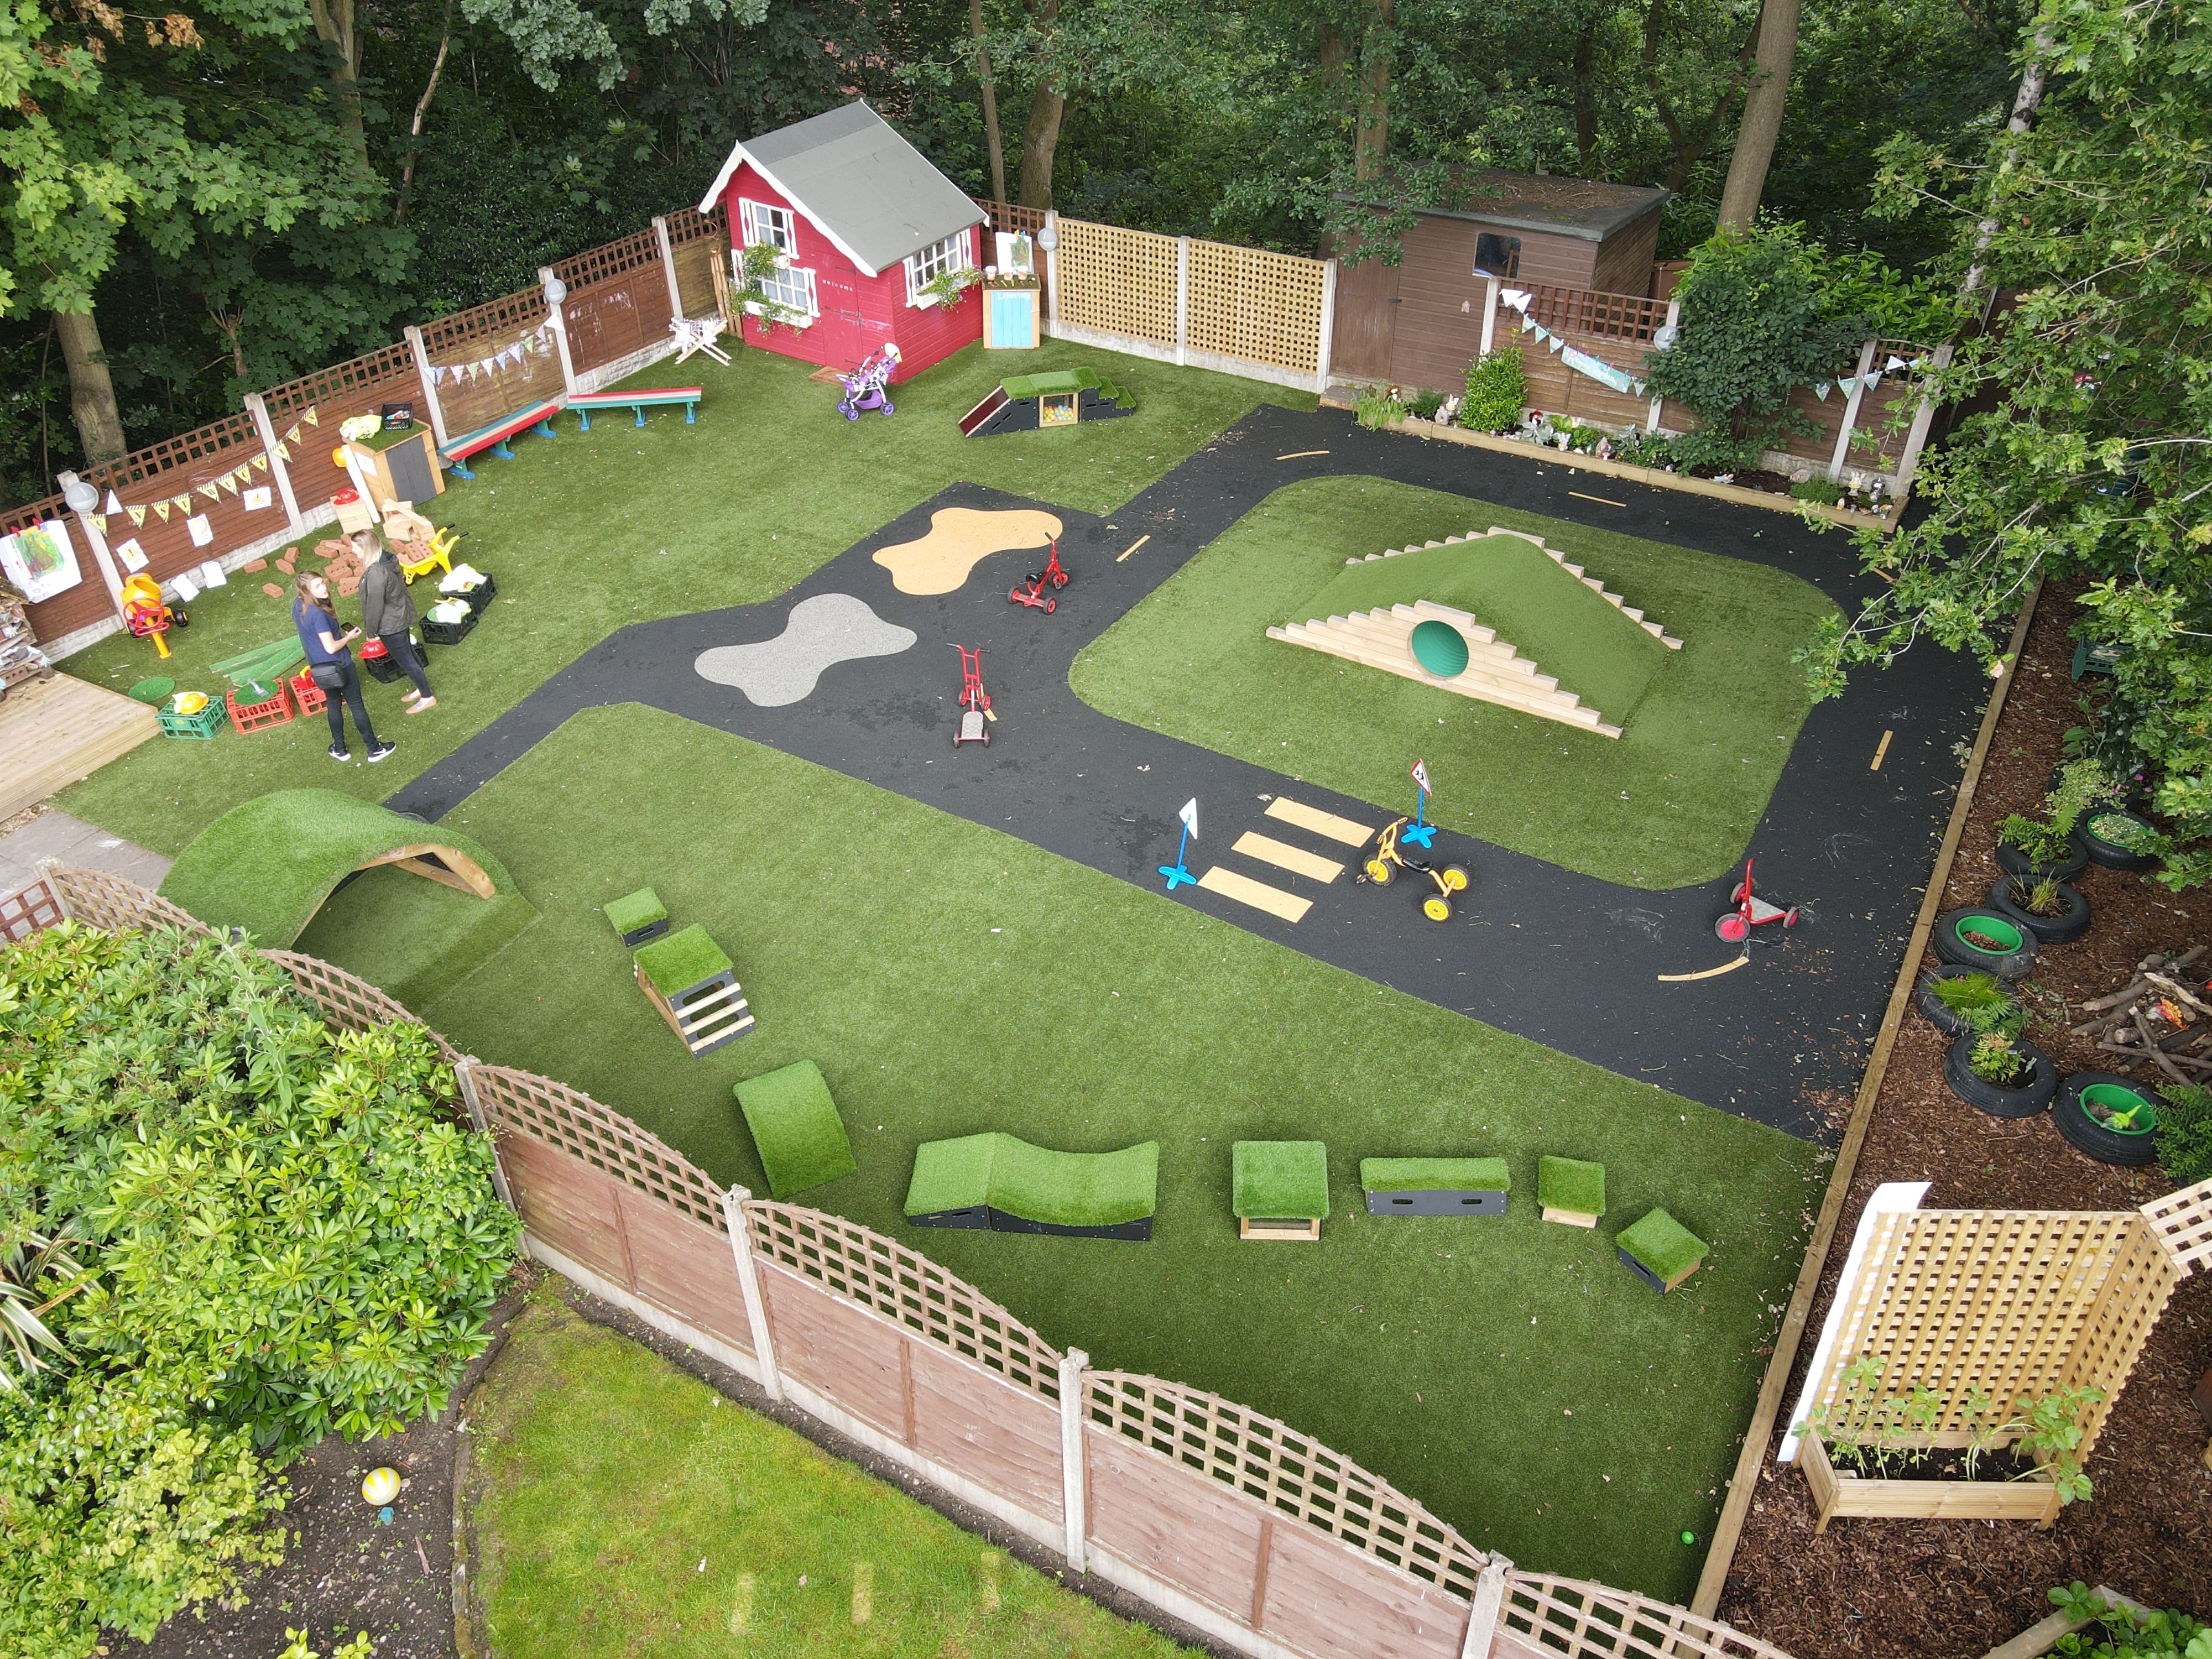 A drone shot showcasing a playground with a wide variety of different playground equipment. A road marking is present, with artificial grass surrounding the whole area.